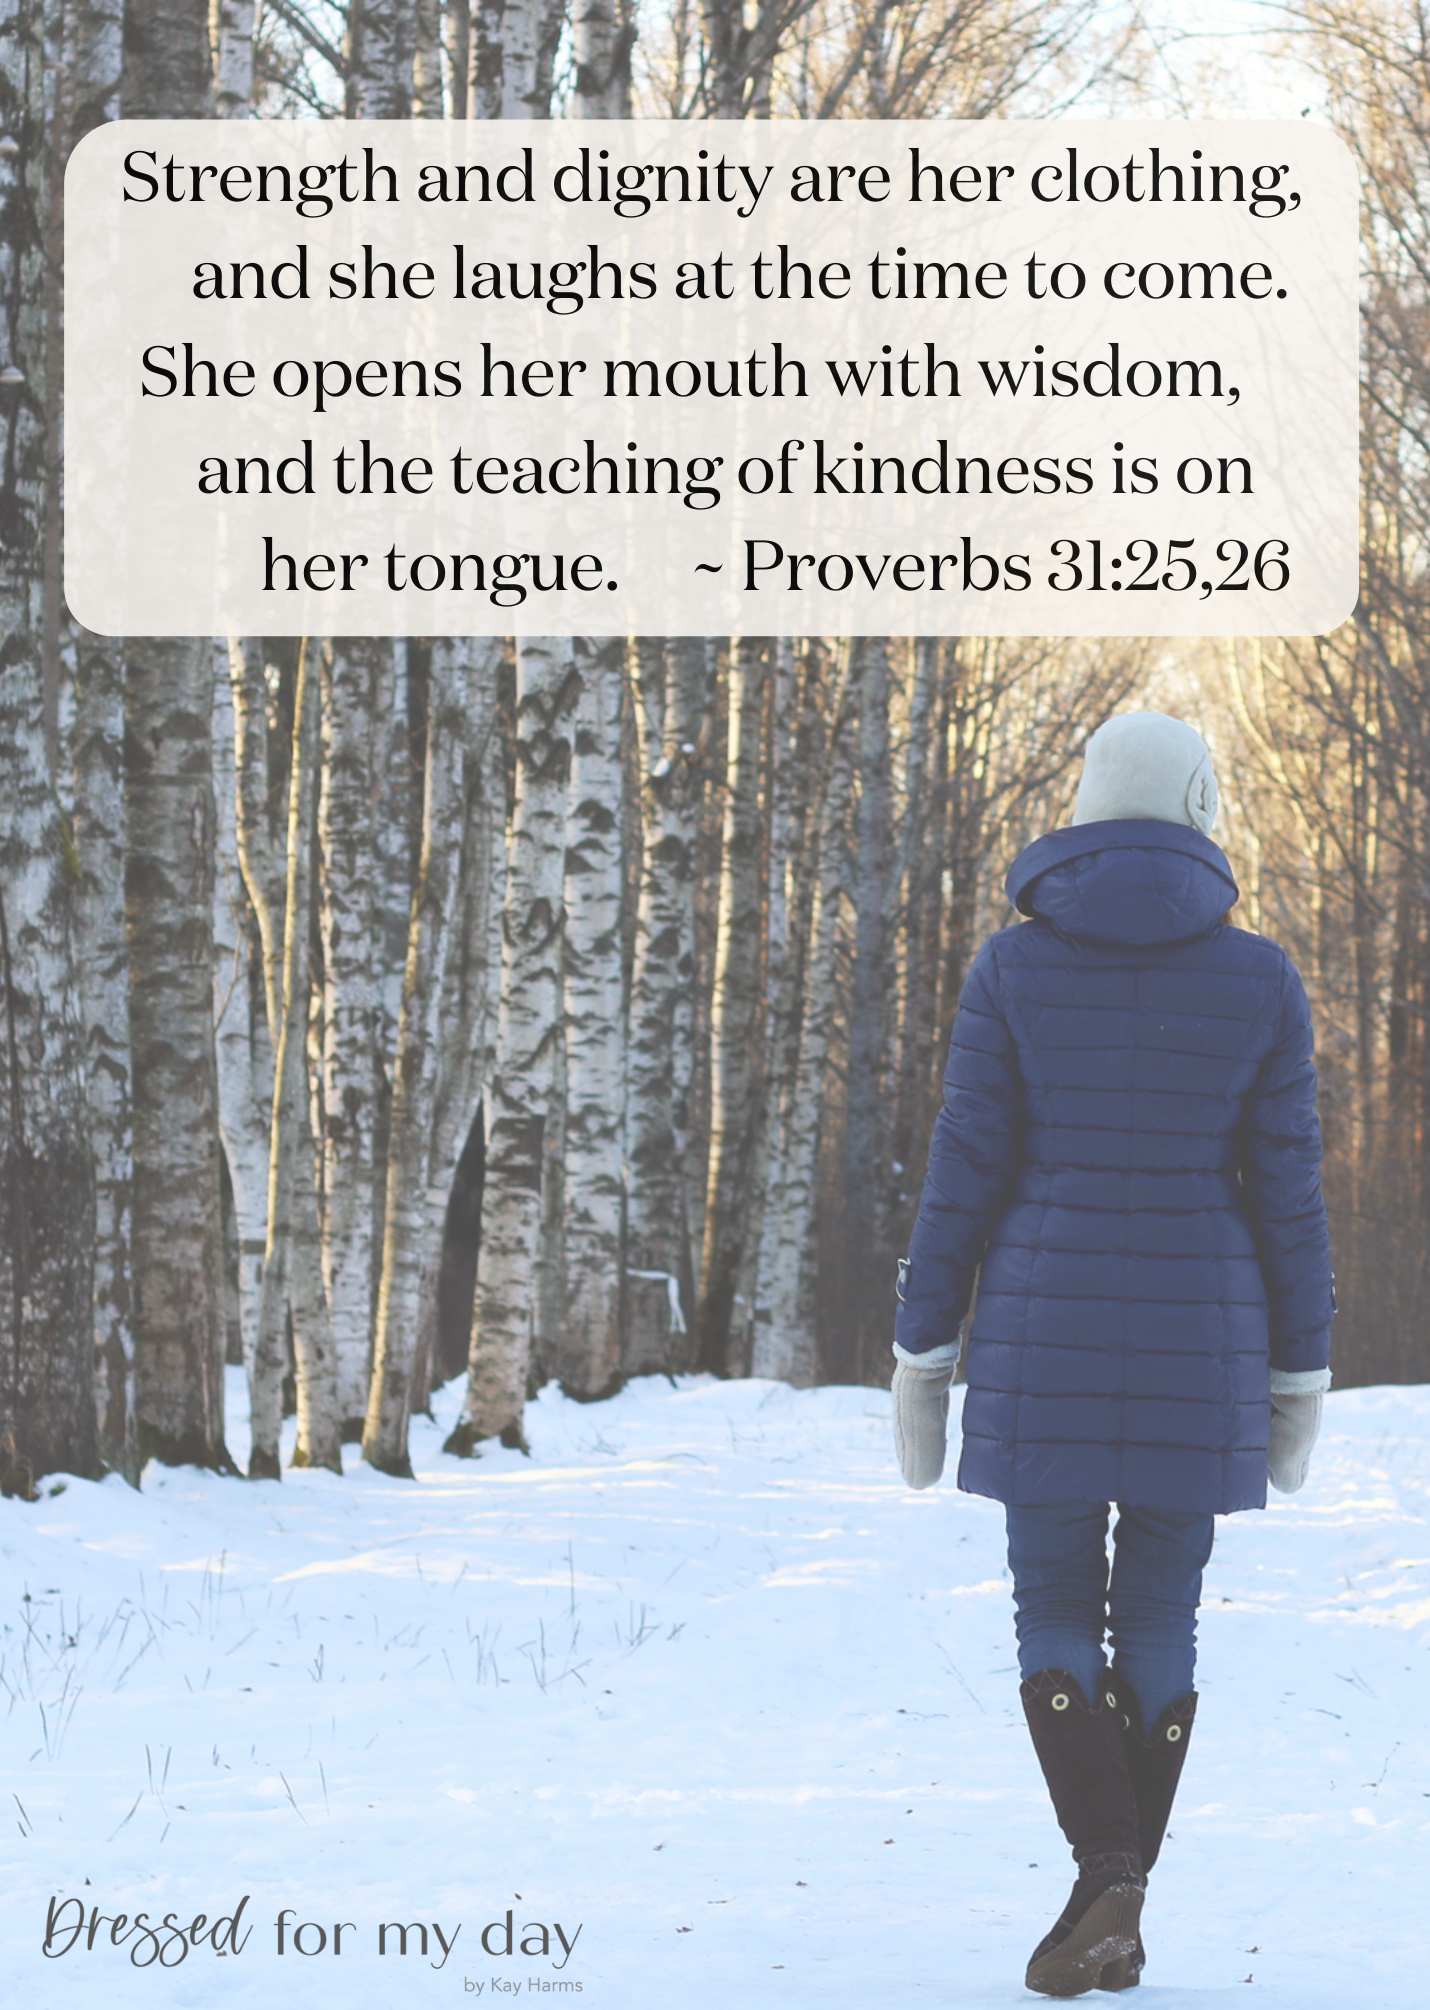 Strength and dignity are her clothing, and she laughs at the time to come. 26 She opens her mouth with wisdom, and the teaching of kindness is on her tongue.